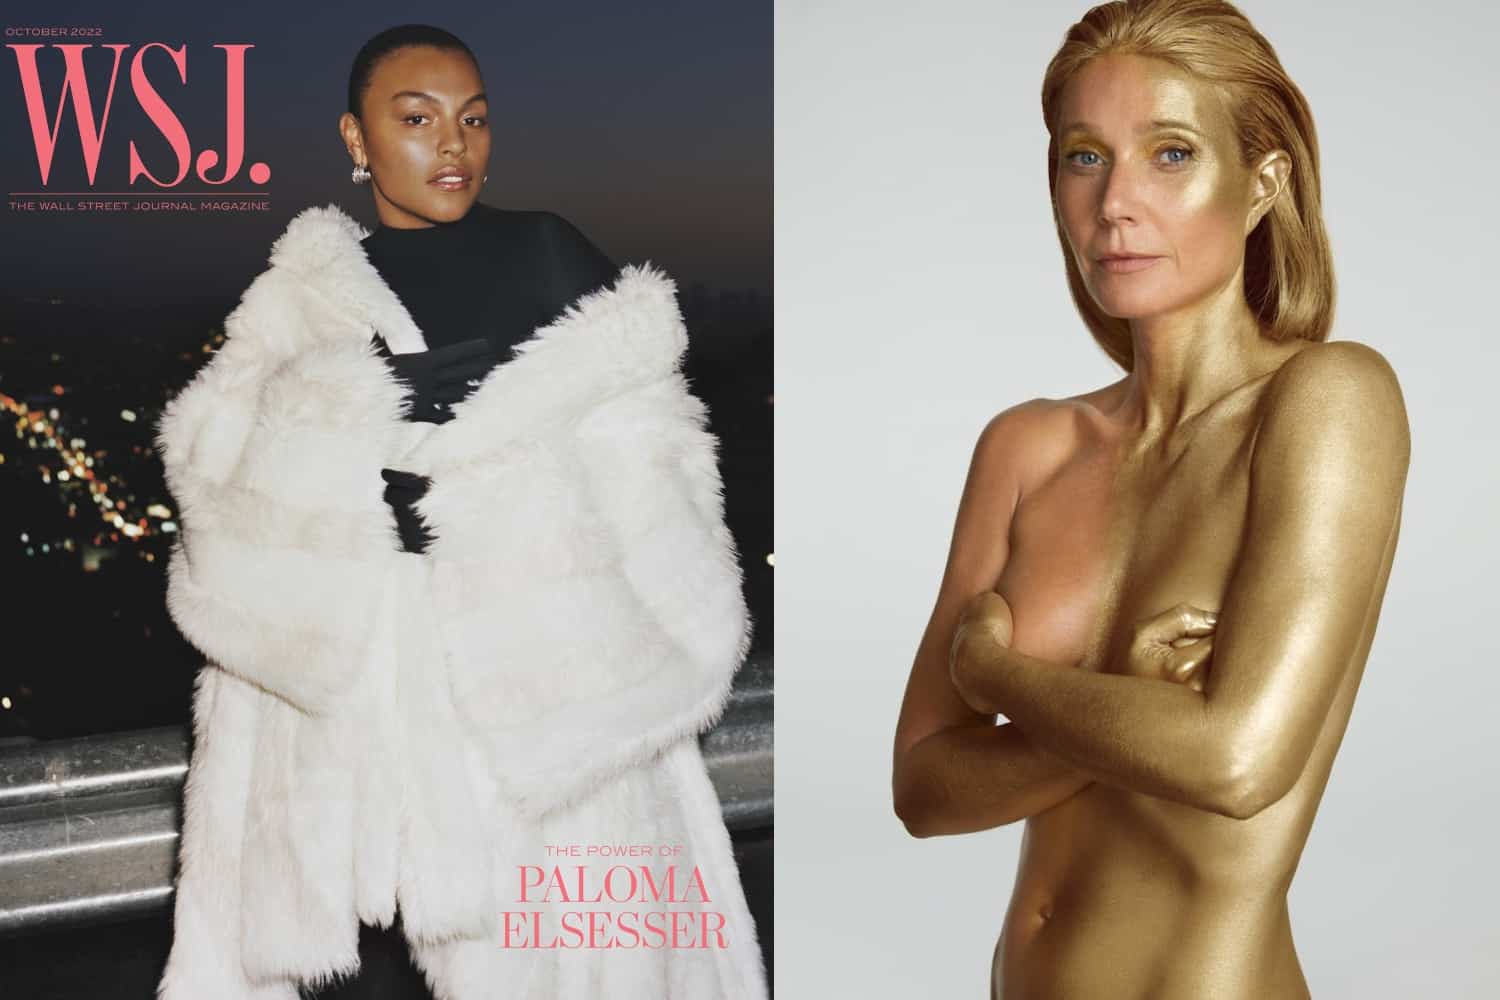 GWYNETH PALTROW GOES NUDE FOR HER 50TH, PALOMA ELSESSER OPENS UP ABOUT HER ABORTION, SALLY LAPOINTE’S FIRST COLLAB, AND MORE!